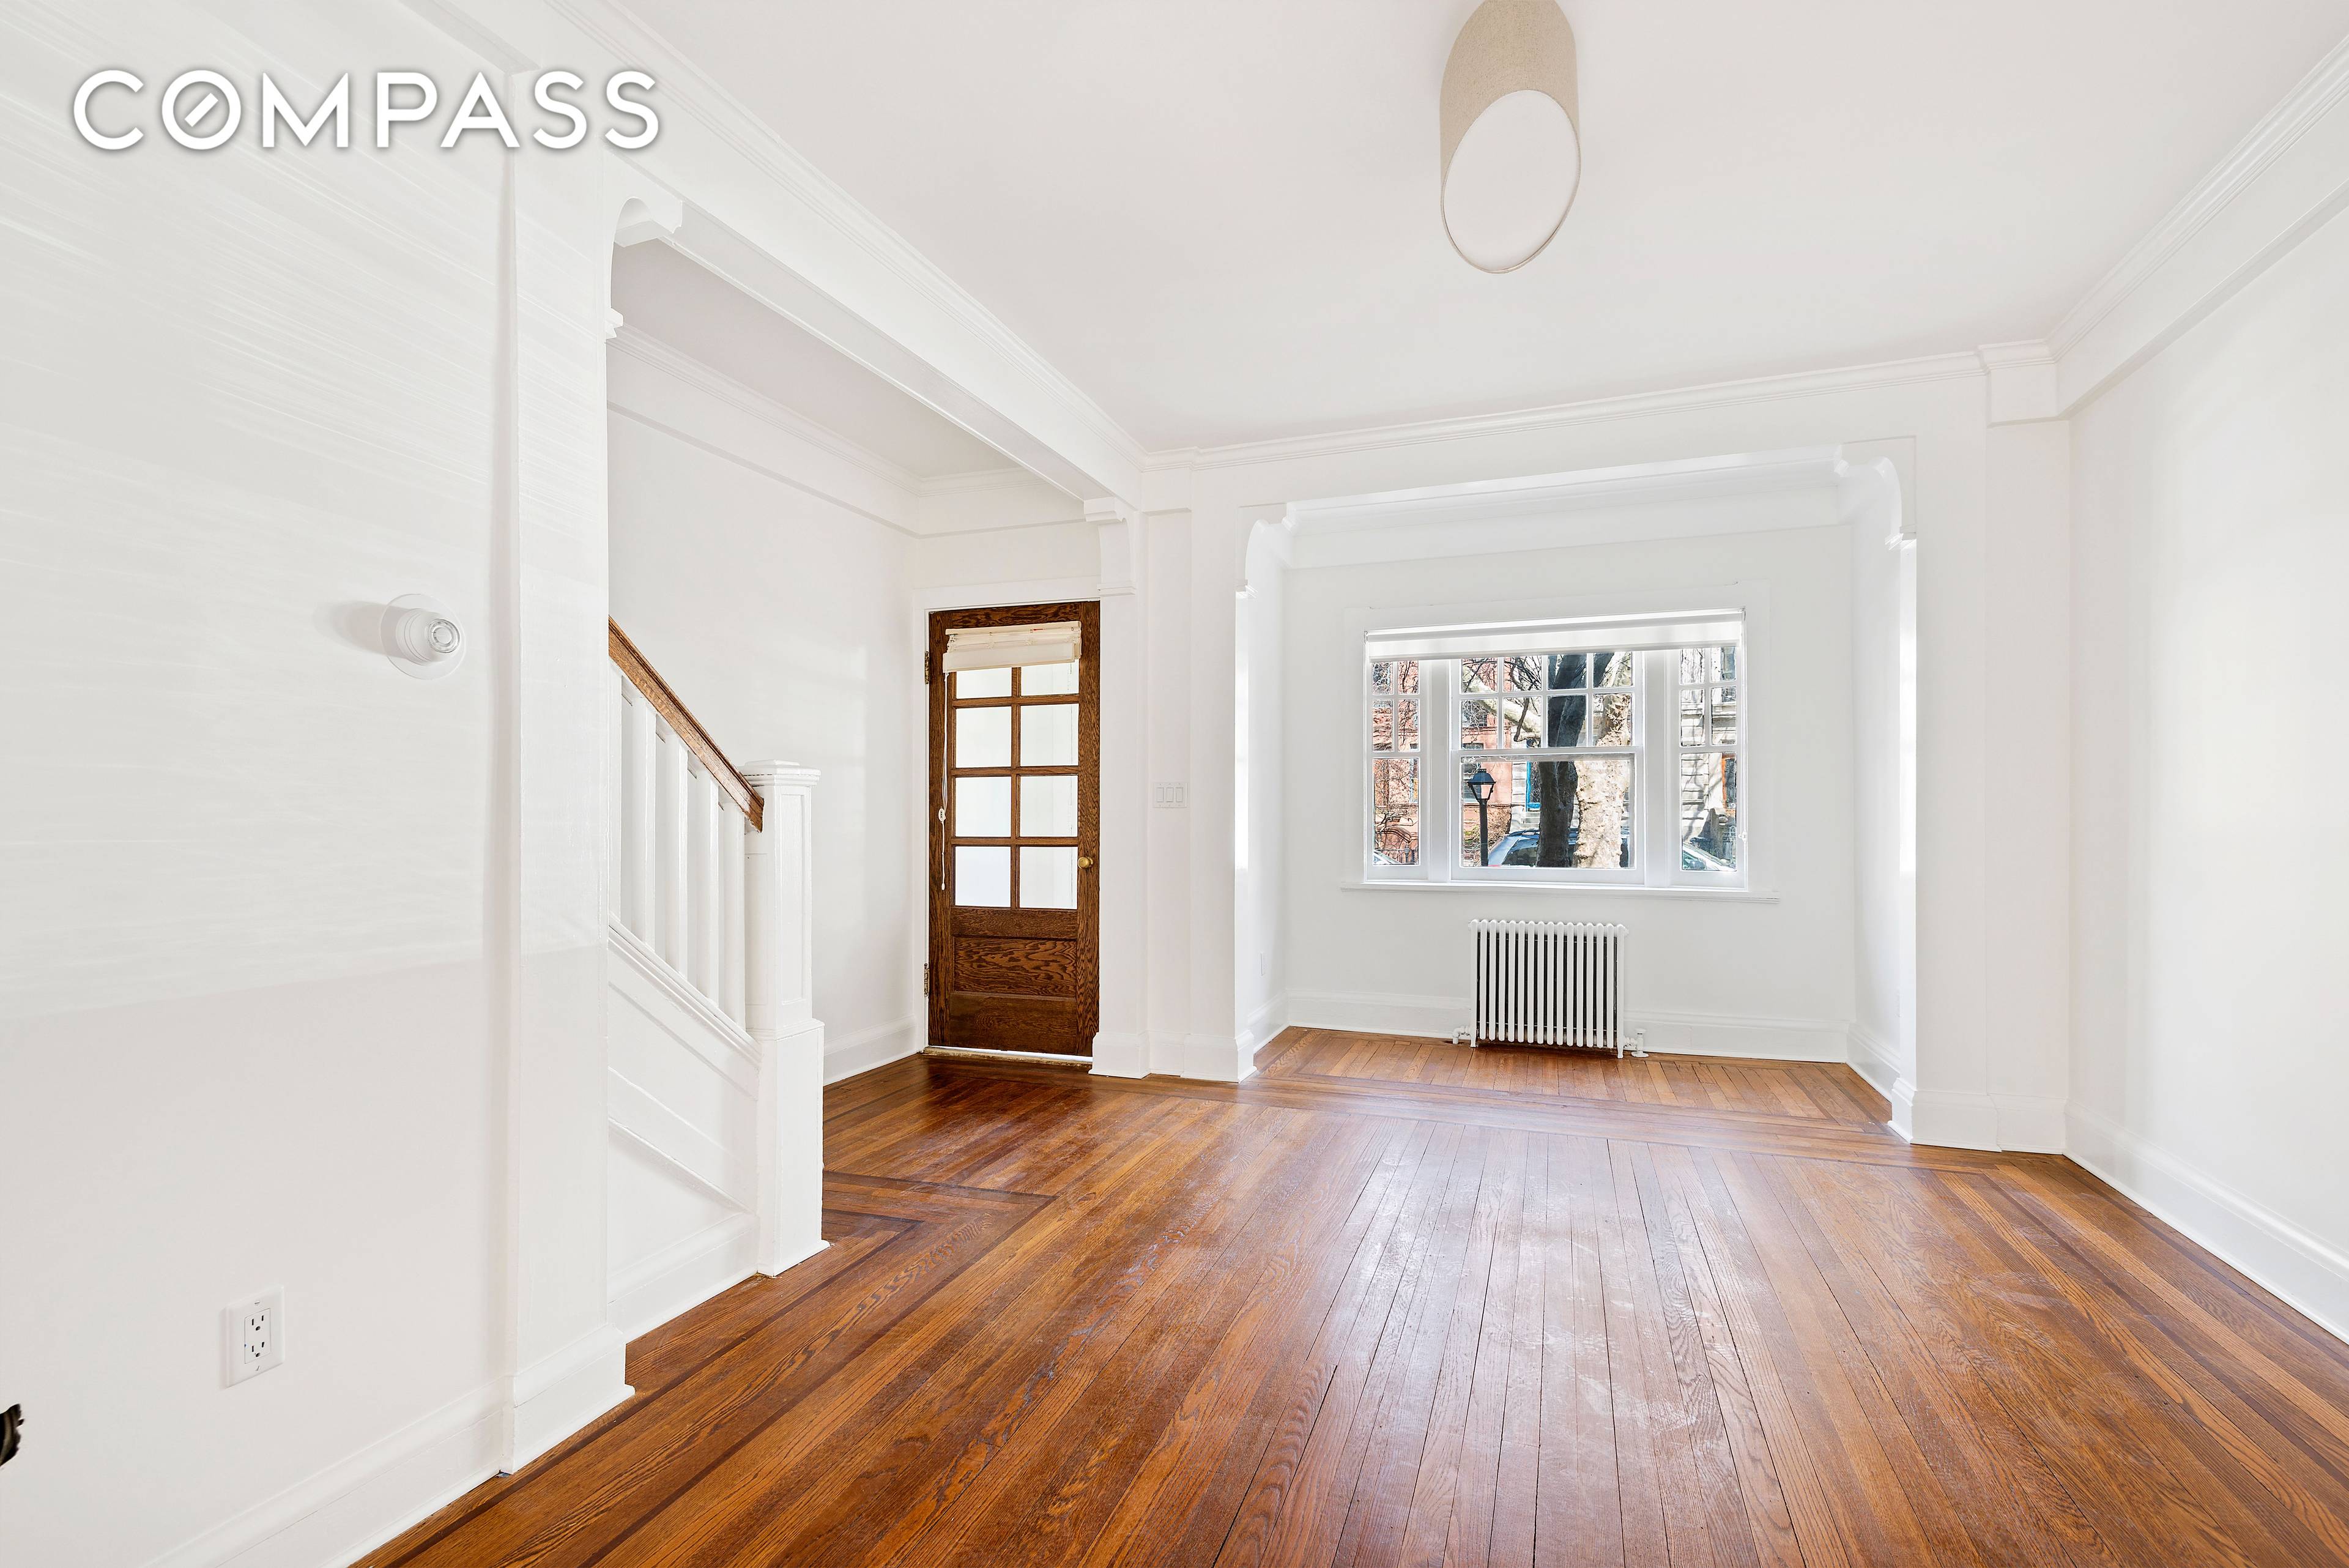 Beautiful two family double duplex in prime park slope coming soon.